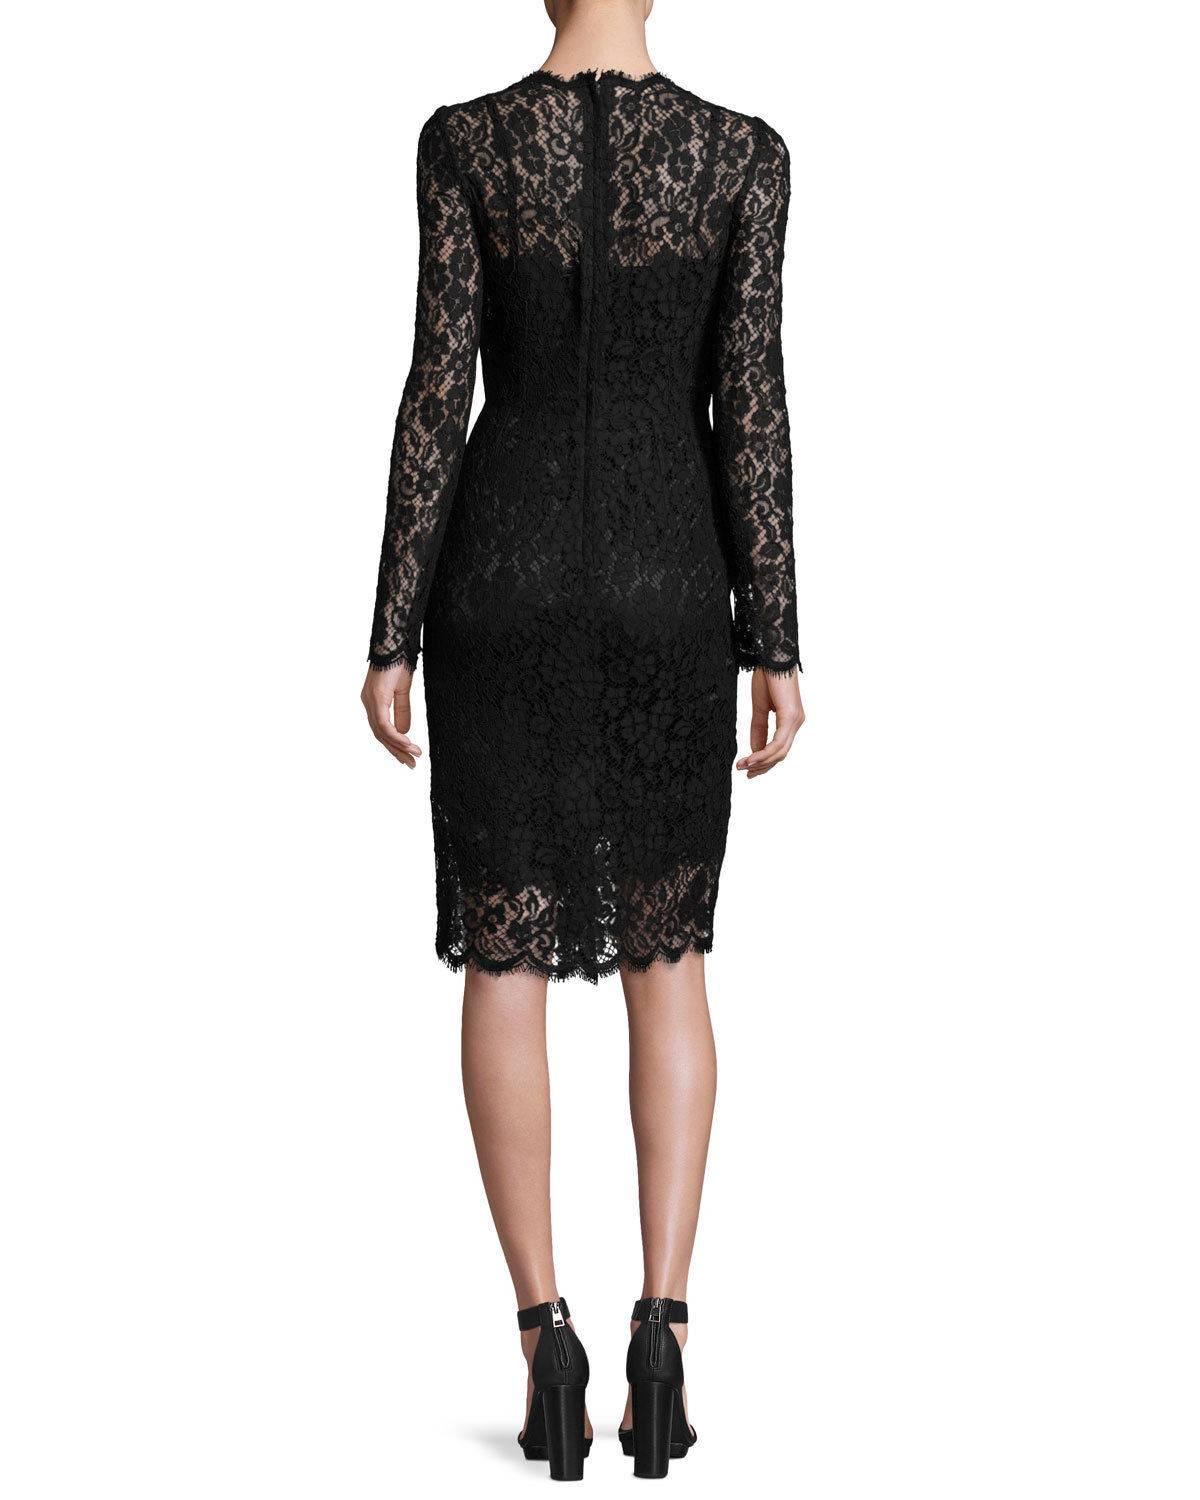 New £1983 Dolce and Gabbana Black Lace Overlay Dress Italian 44 uk 12 In New Condition For Sale In London, GB